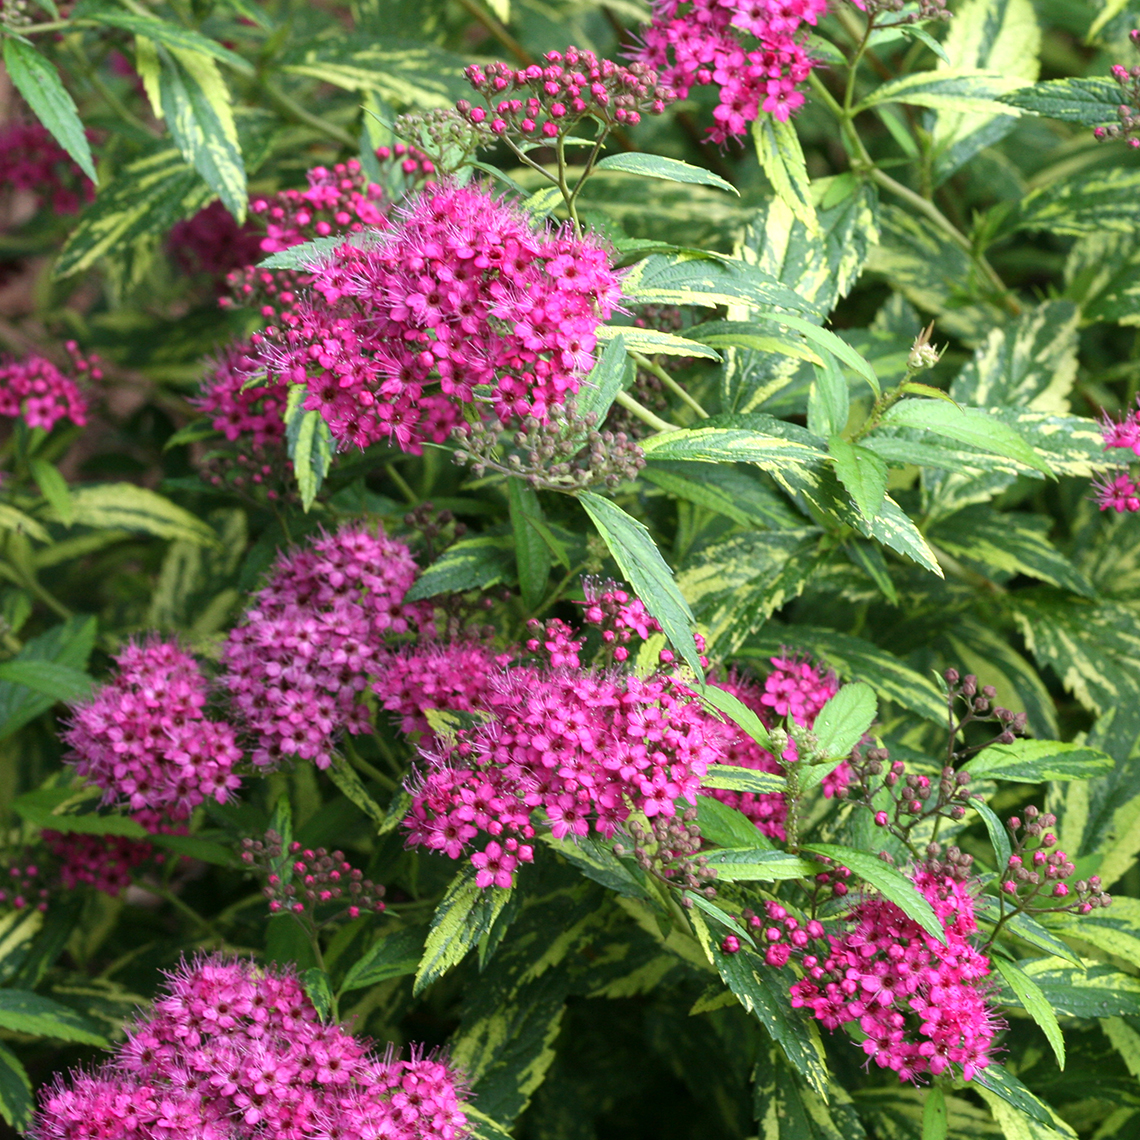 Close up of Double Play Painted Lady Spiraea's pink flowers and variegated foliage